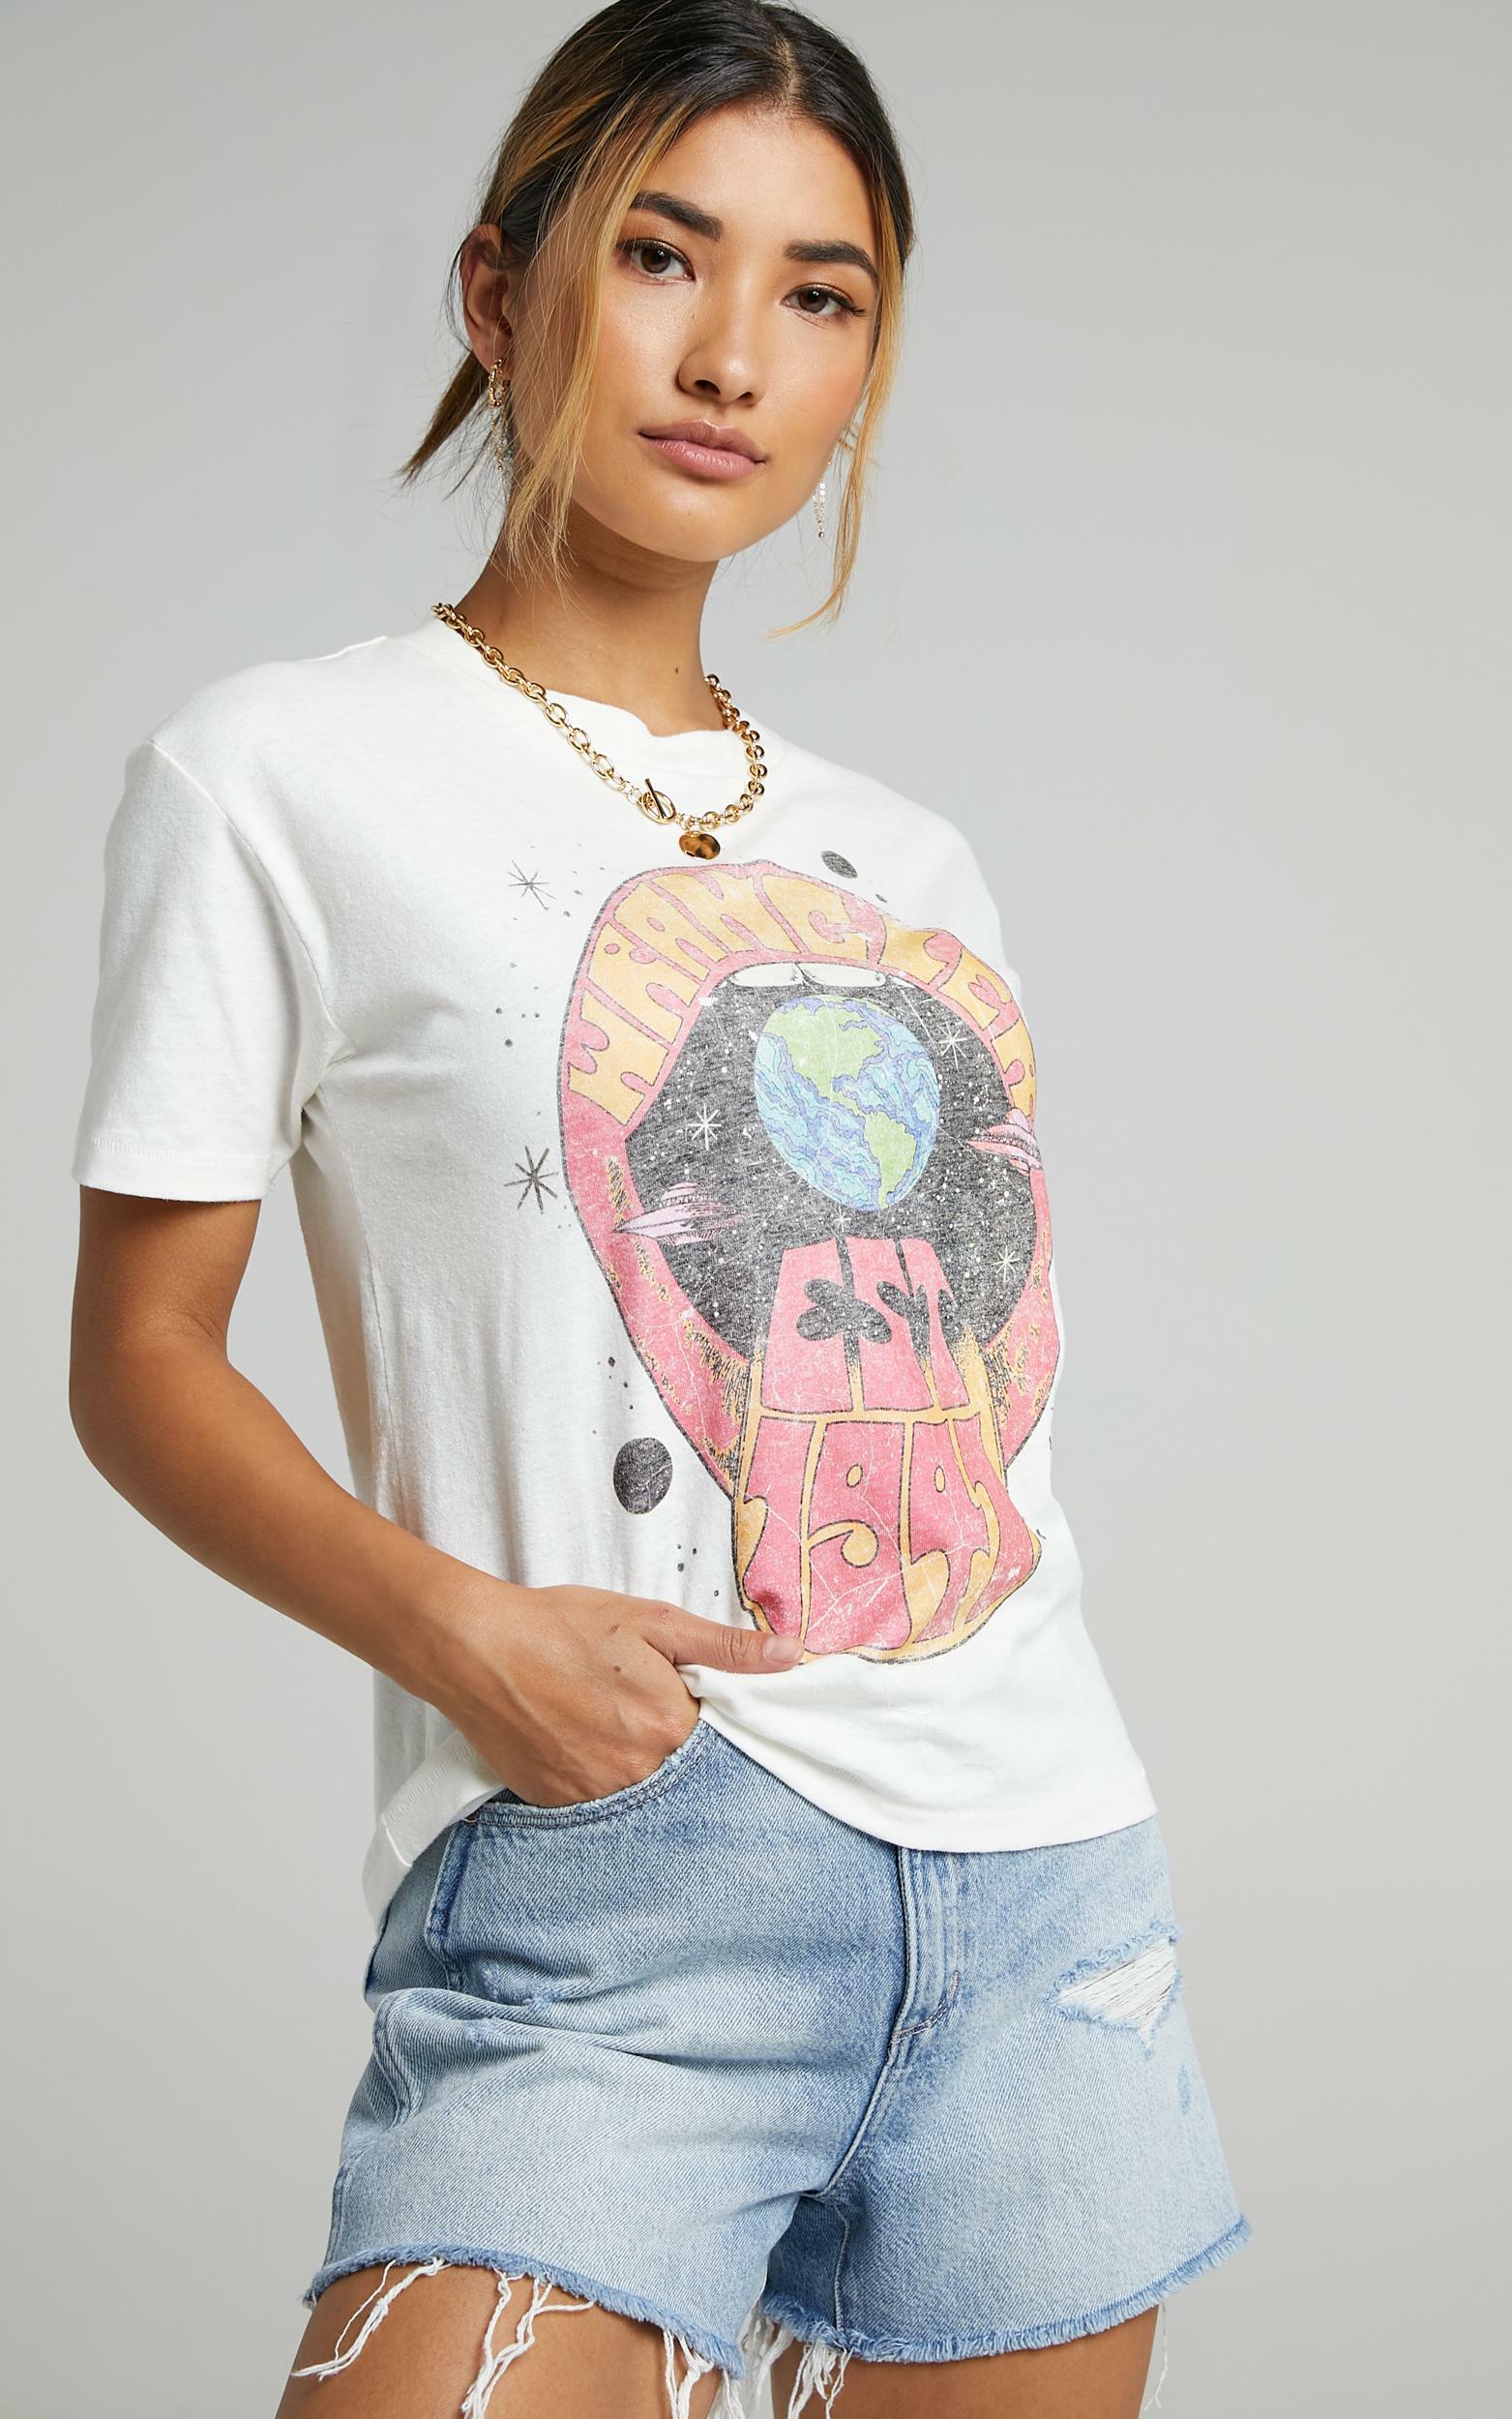 Wrangler - Hellhound Tee in Vintage White - 06, WHT2, hi-res image number null